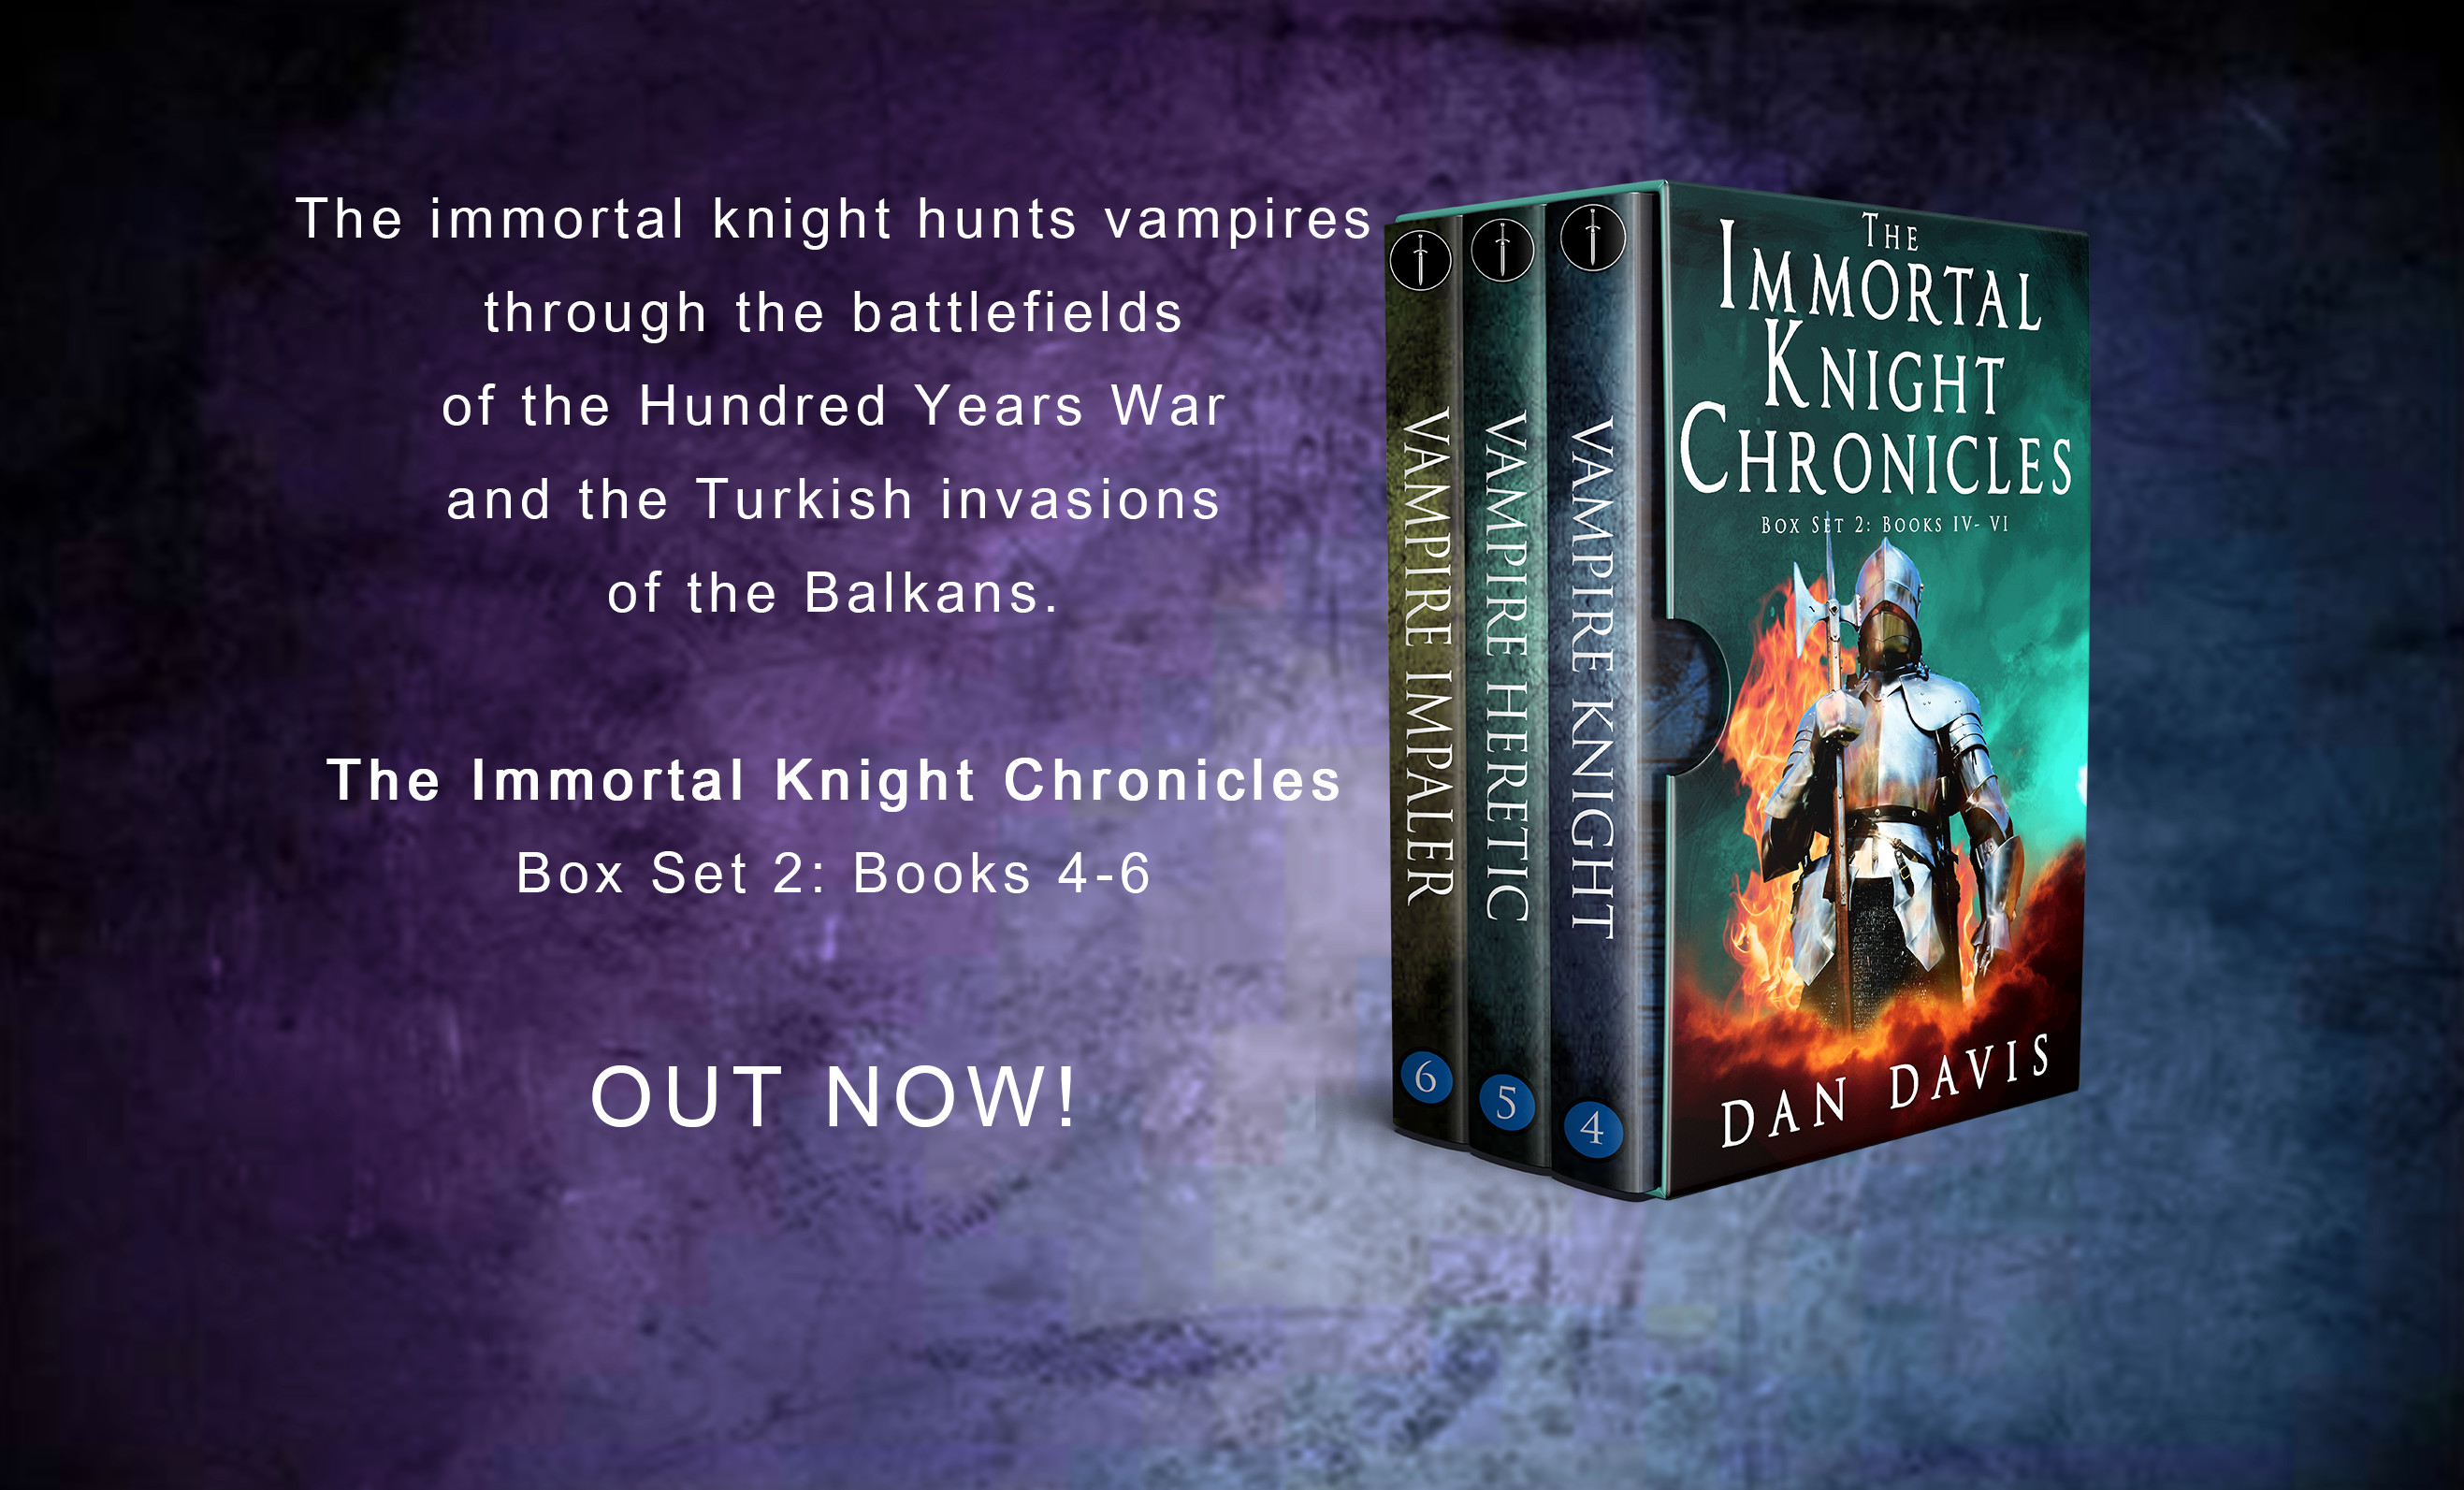 Out now – the Immortal Knight Chronicles Box Set 2: Books 4-6